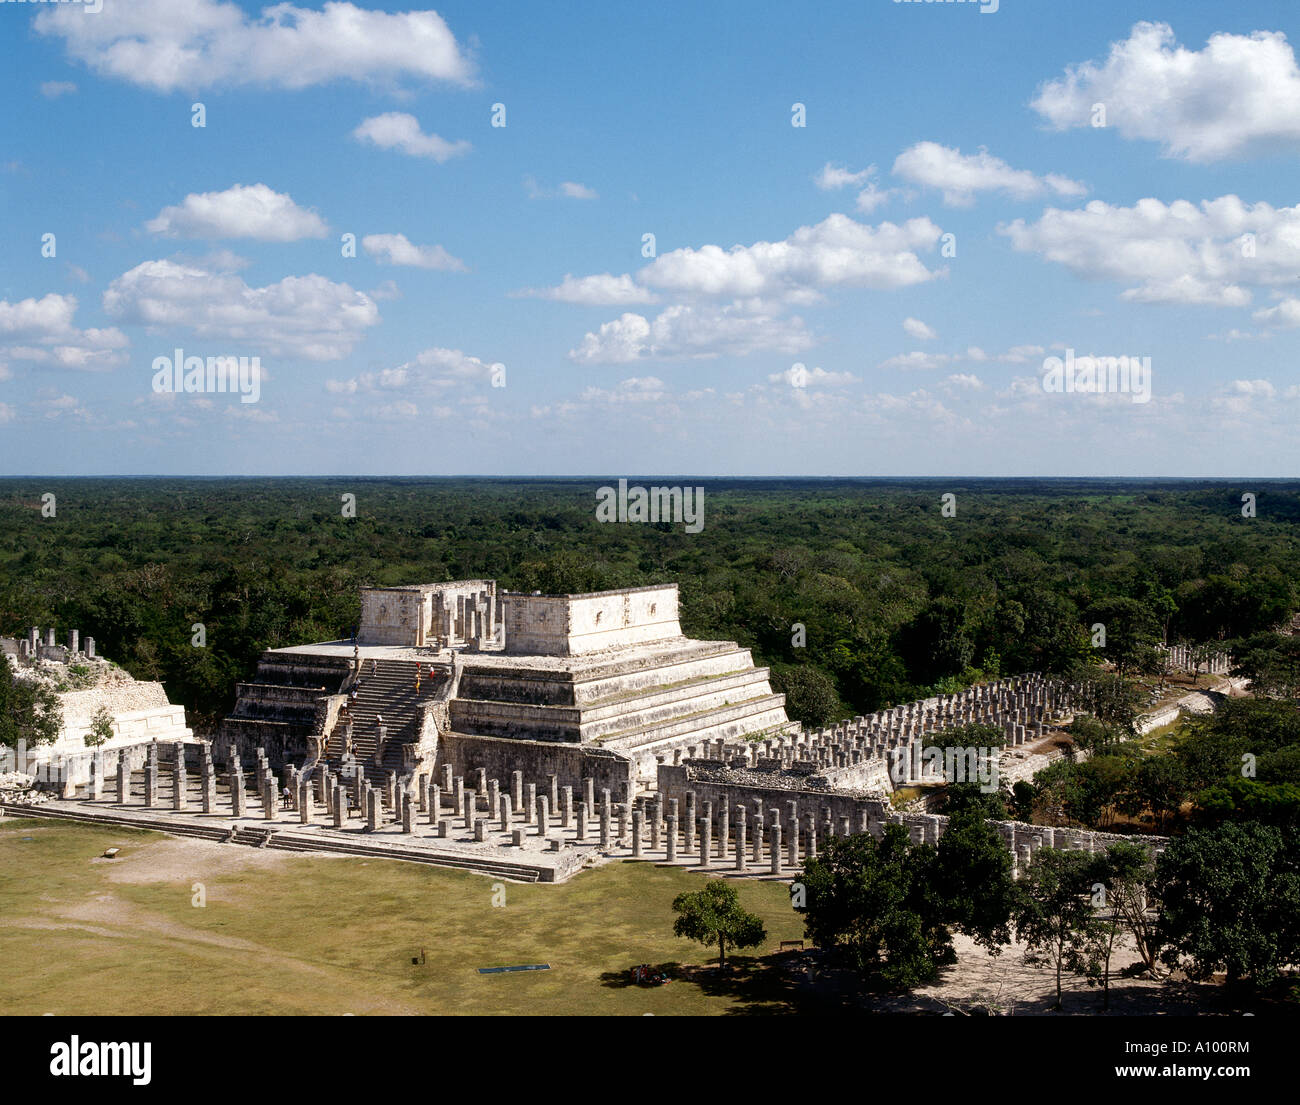 Looking towards the Group of the Thousand Columns around the Temple of Warriors at the archaeological site of Chichen Itza Stock Photo